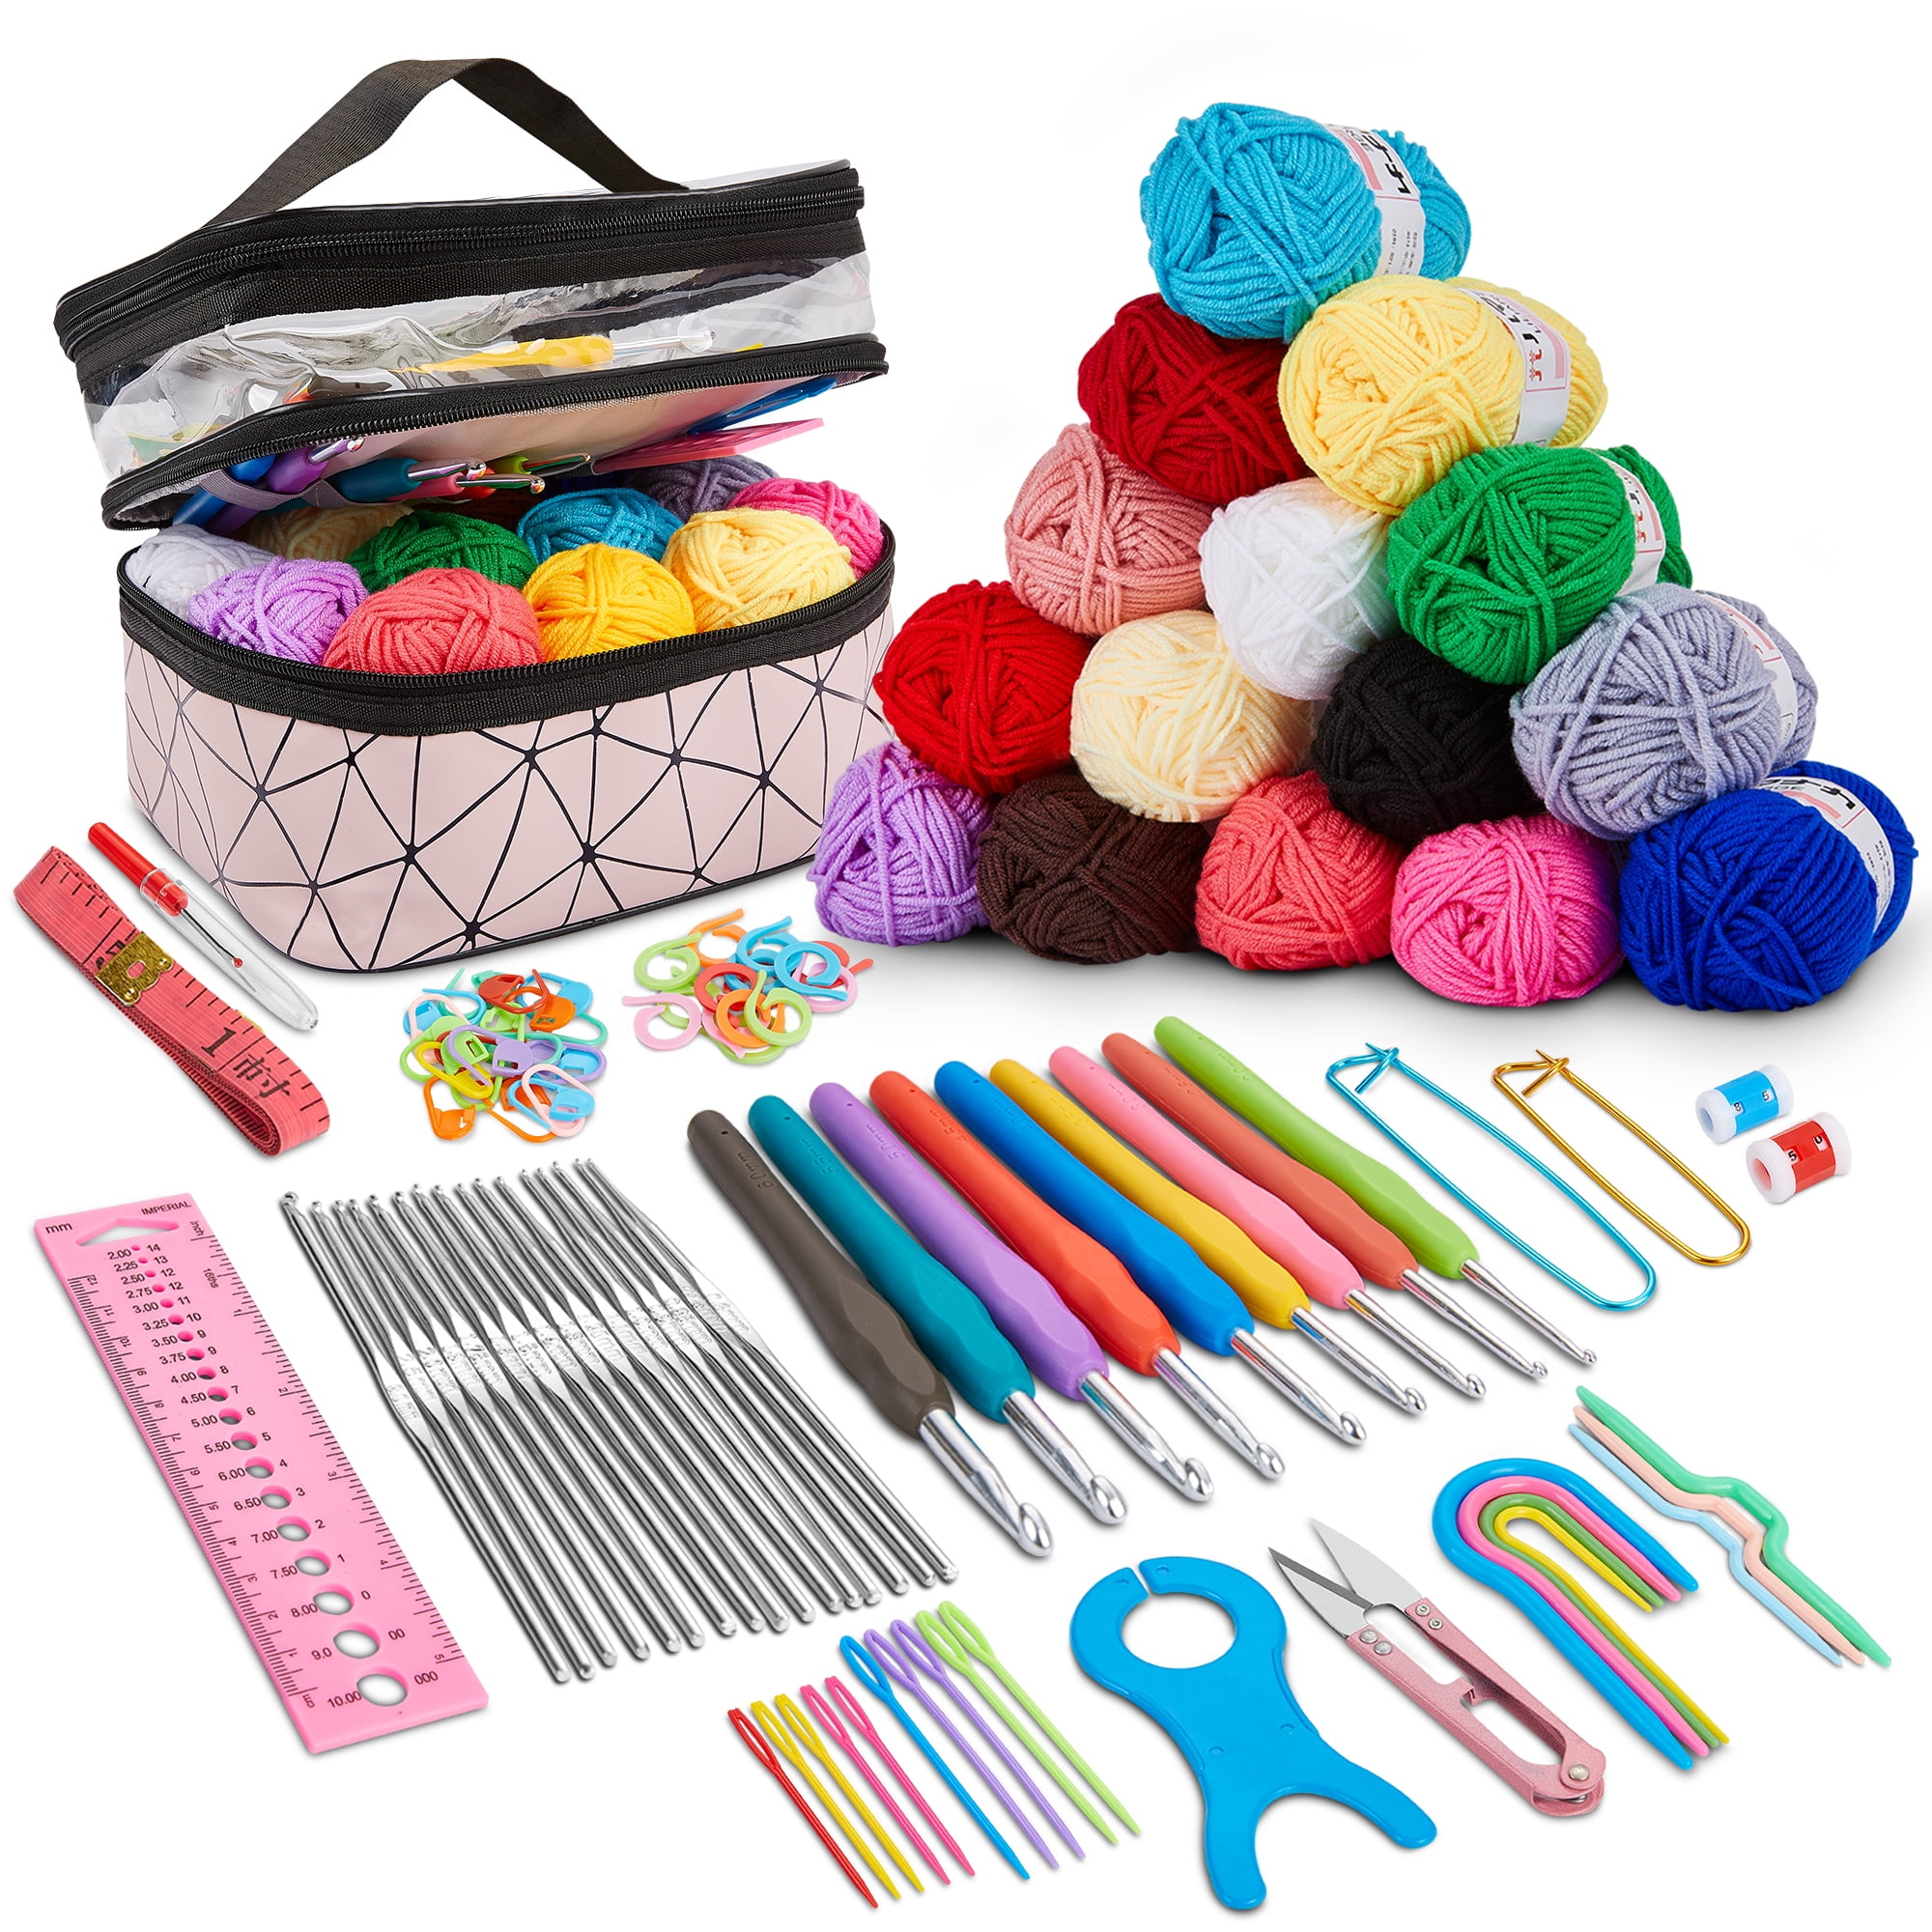 53 Novice Crochet Kits For Beginners and Multi-color Storage Kits